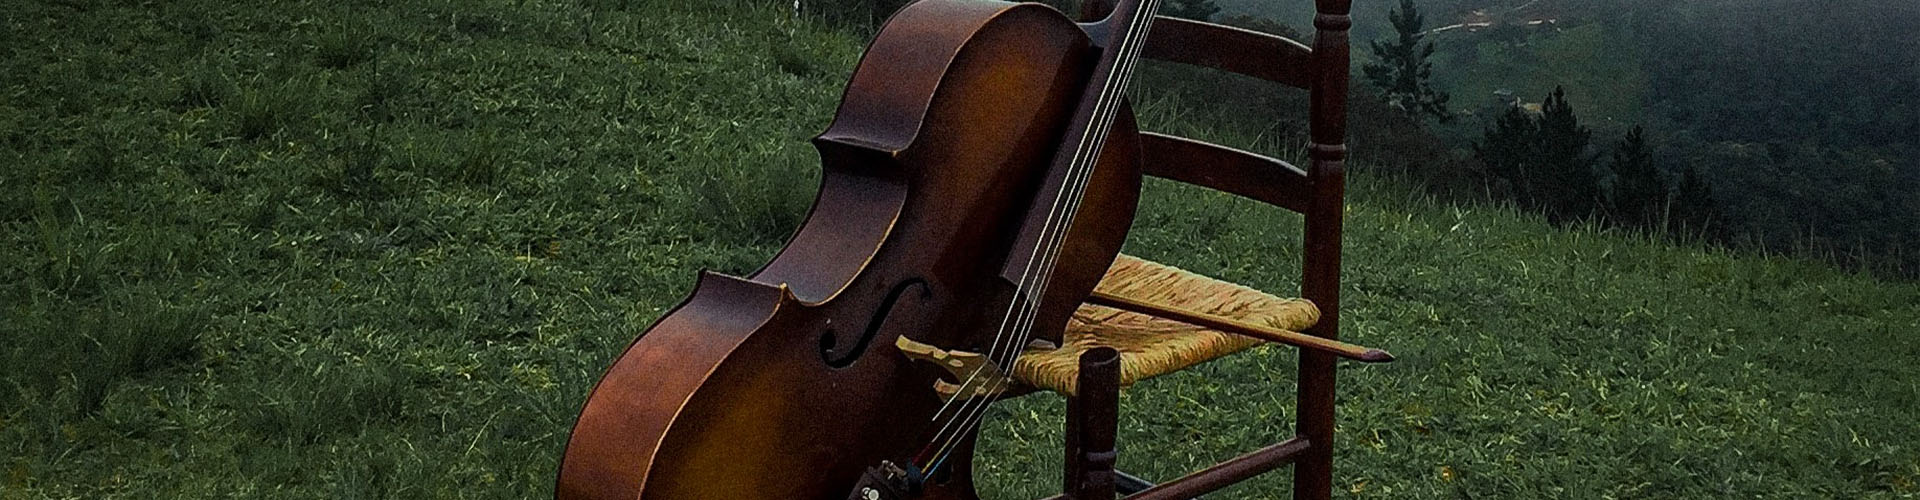 Tips for Beginners Learning How to Play the Cello